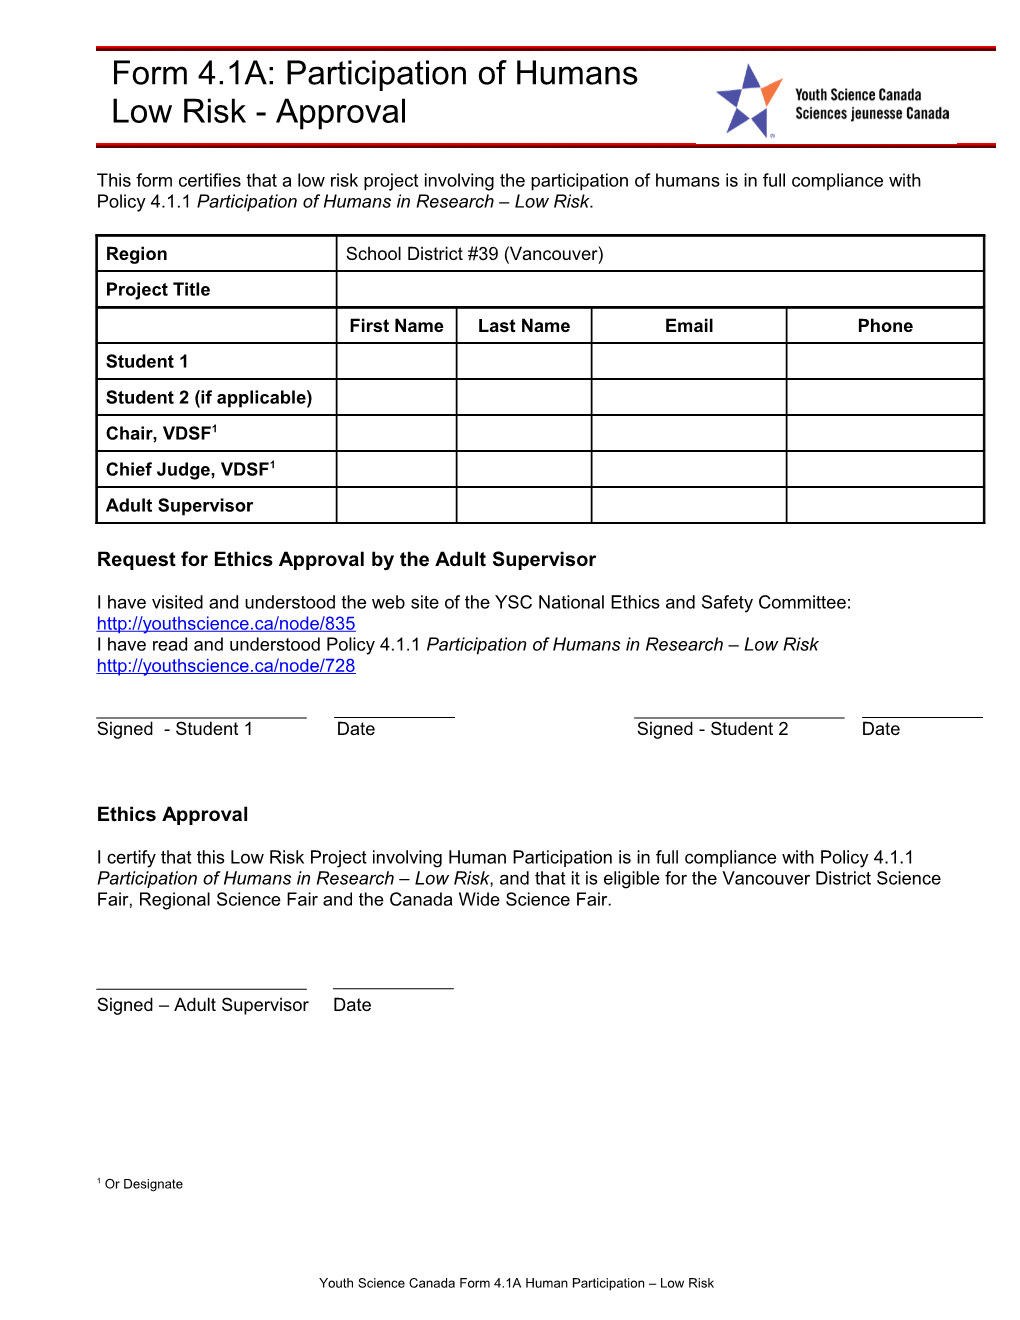 Request for Ethics Approval by the Adult Supervisor